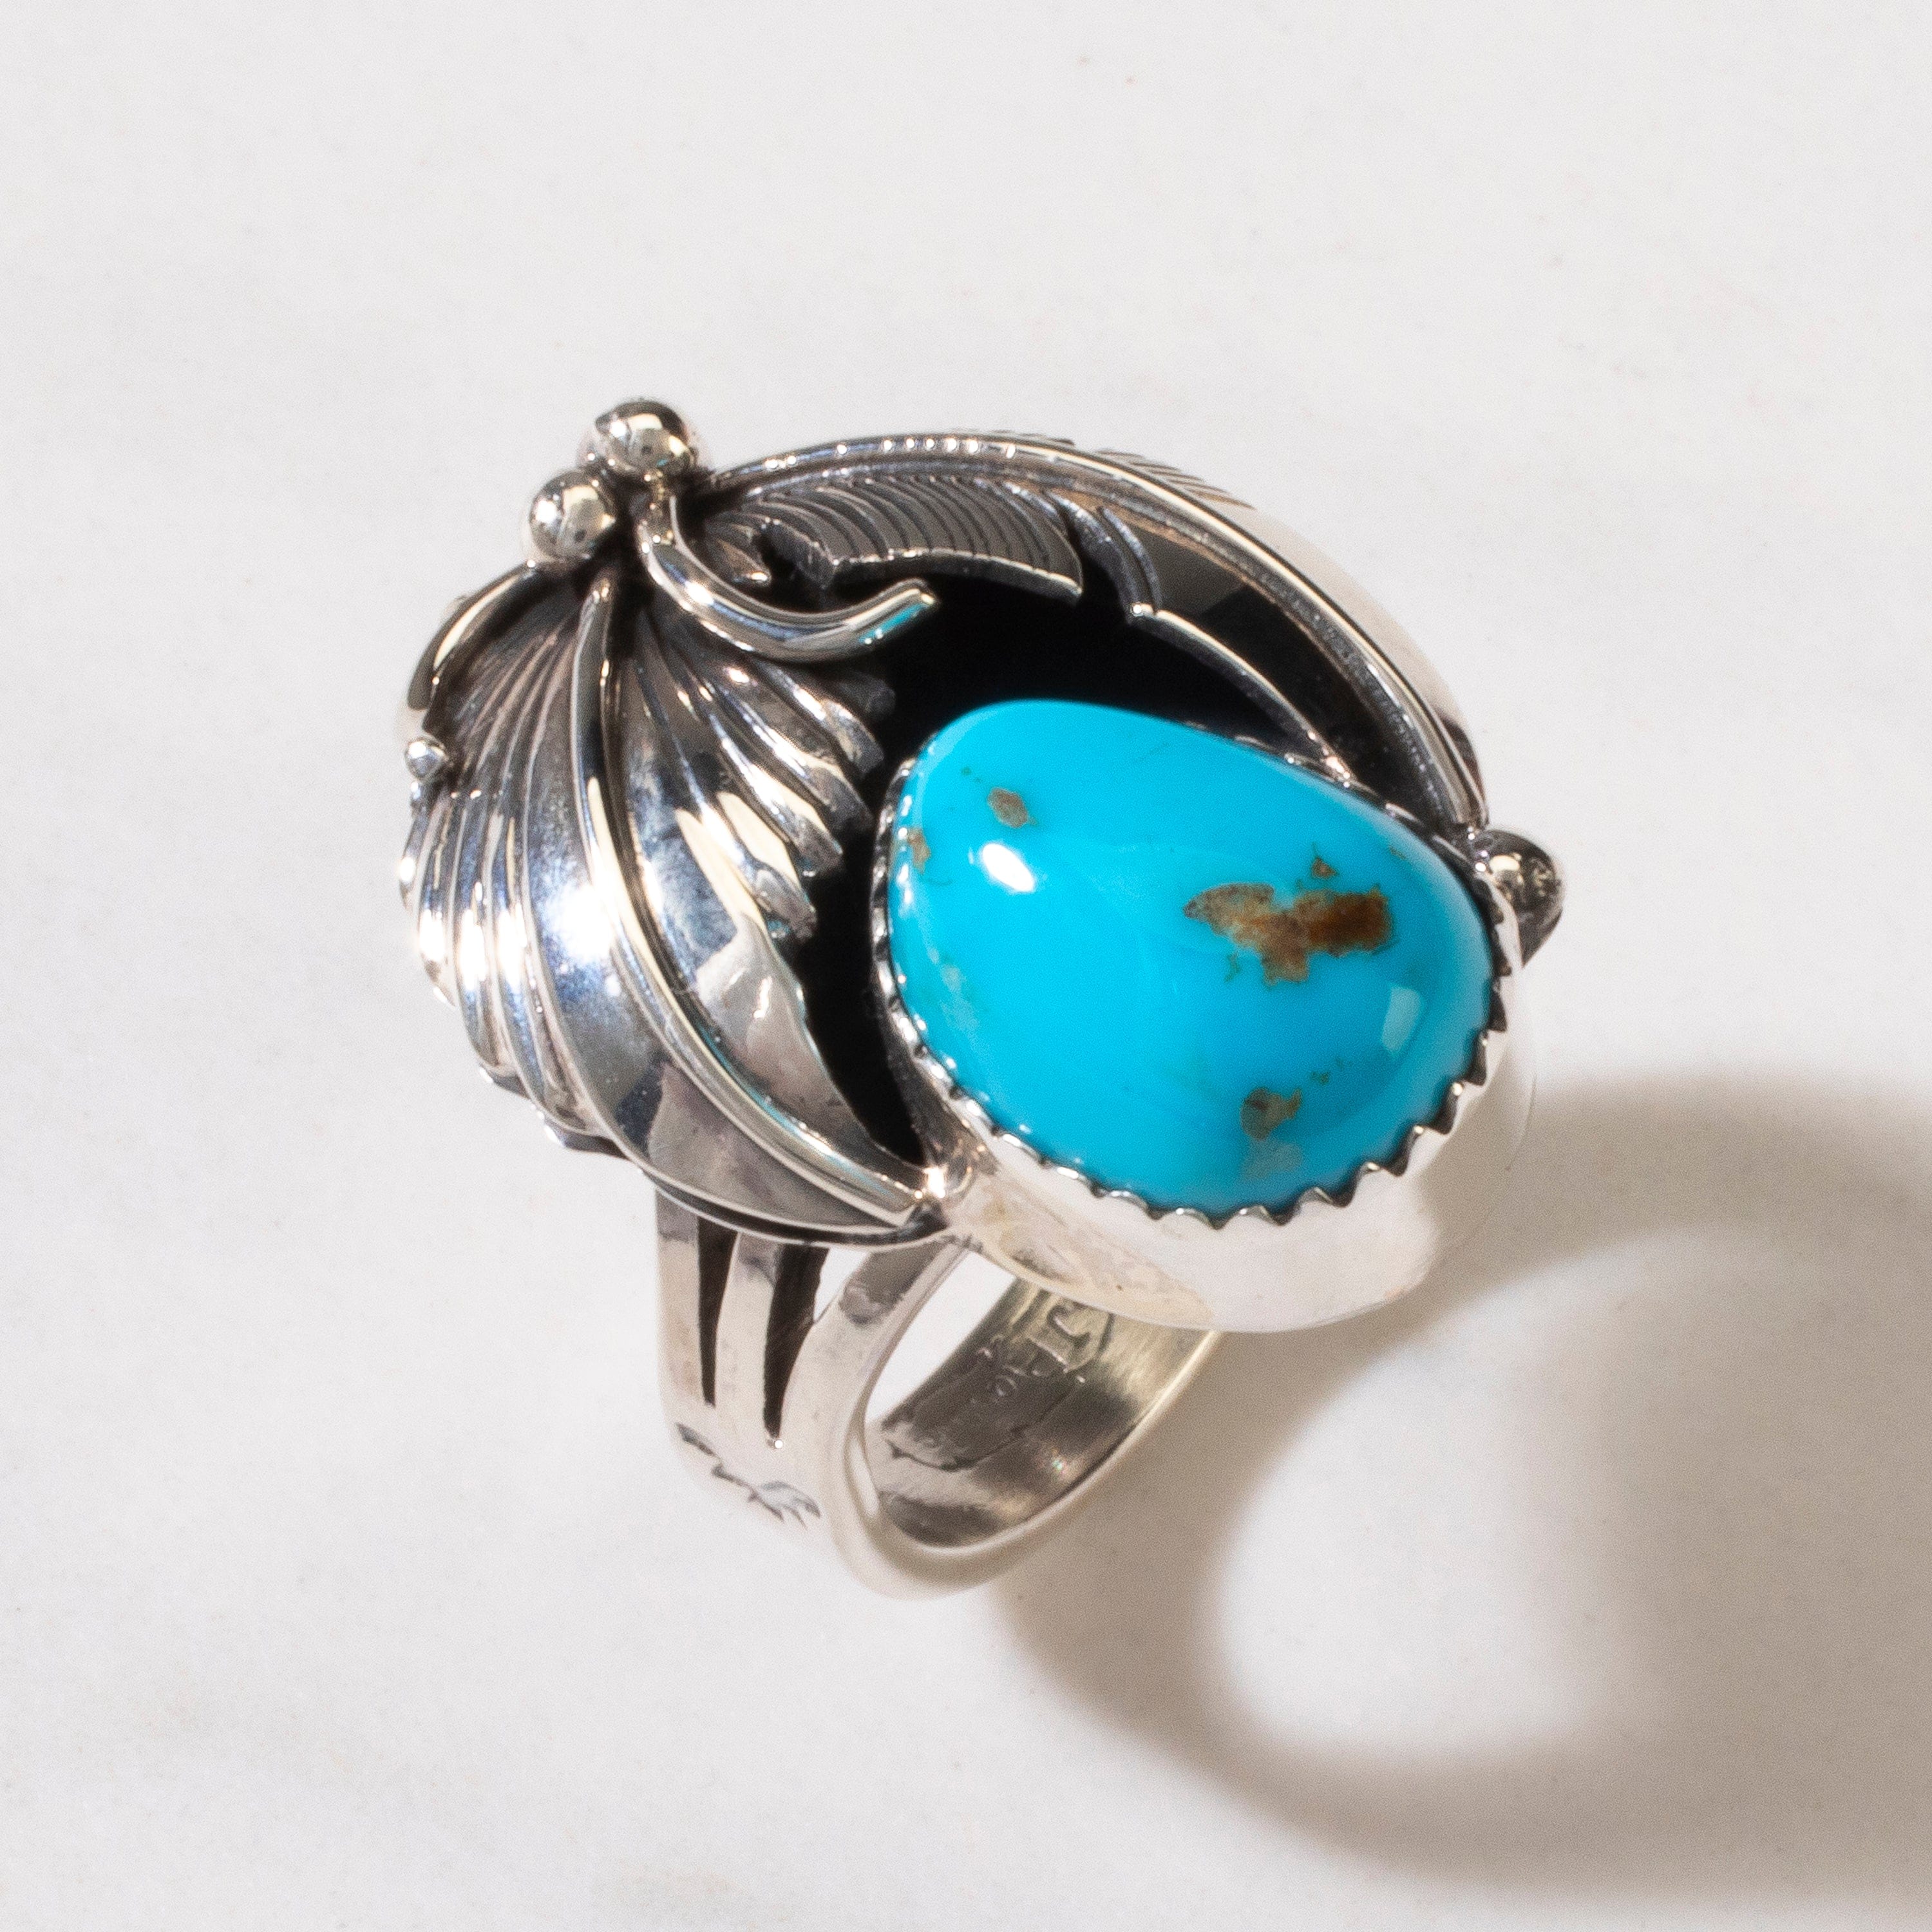 Kalifano Native American Jewelry 9 Joe Piaso Jr. Sleeping Beauty Turquoise Feather Navajo USA Native American Made 925 Sterling Silver Ring NAR600.074.9